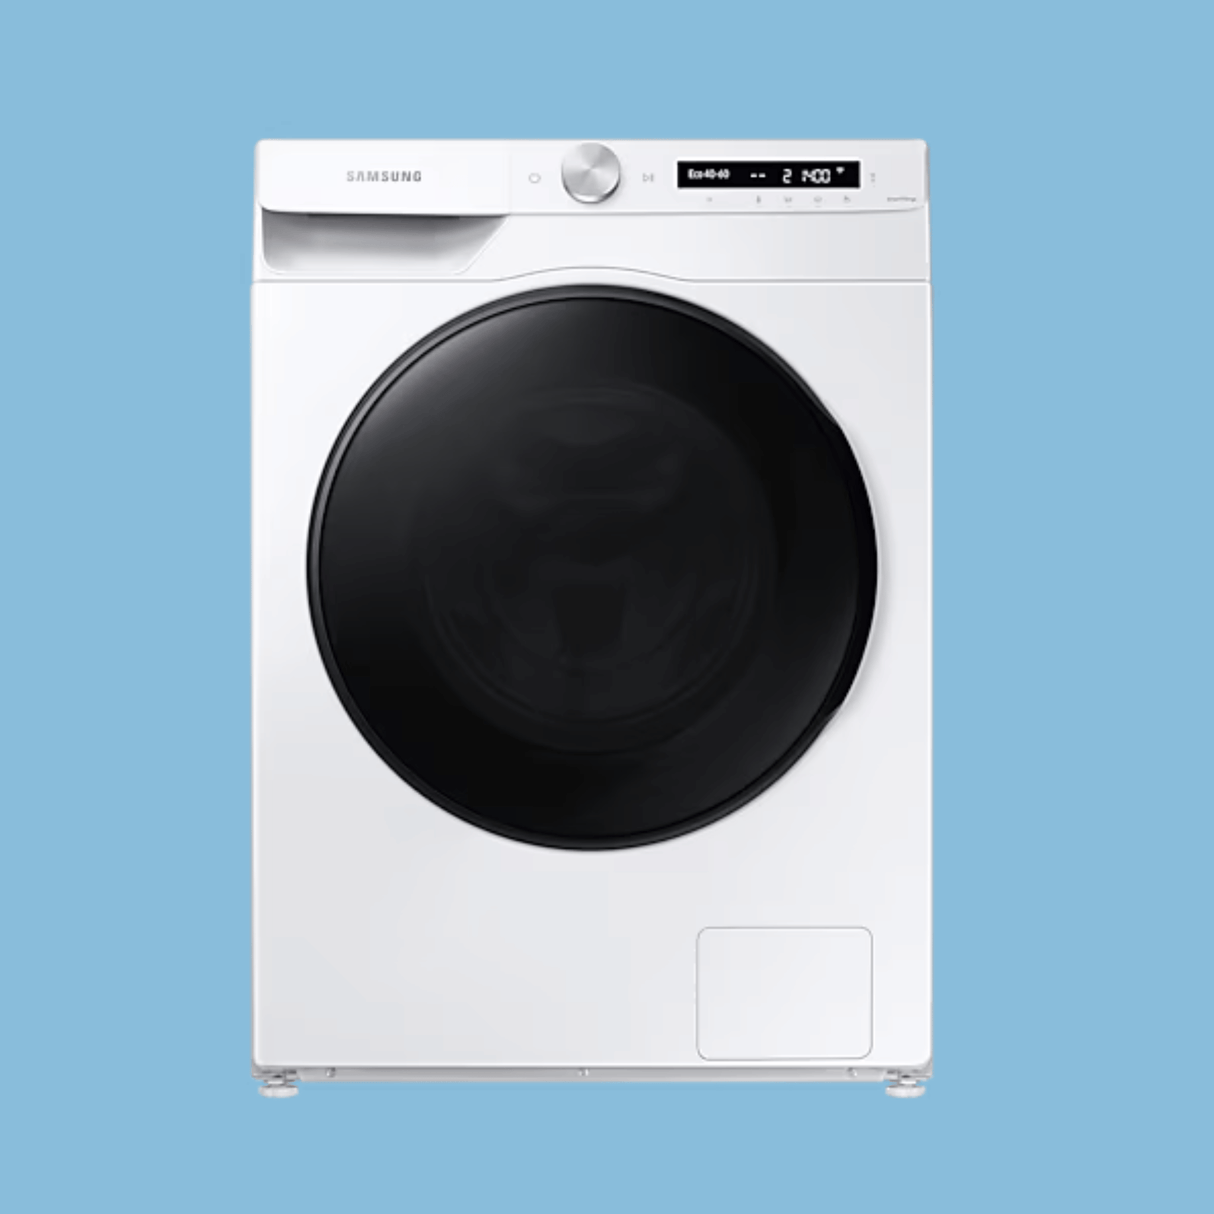 Samsung 9Kg Washer-Dryer Combo Washing Machine - WD90T554DBN with Ai Control, Addwash, Airwash And Ecobubble, 20 Year Warranty on Digital Inverter Motor